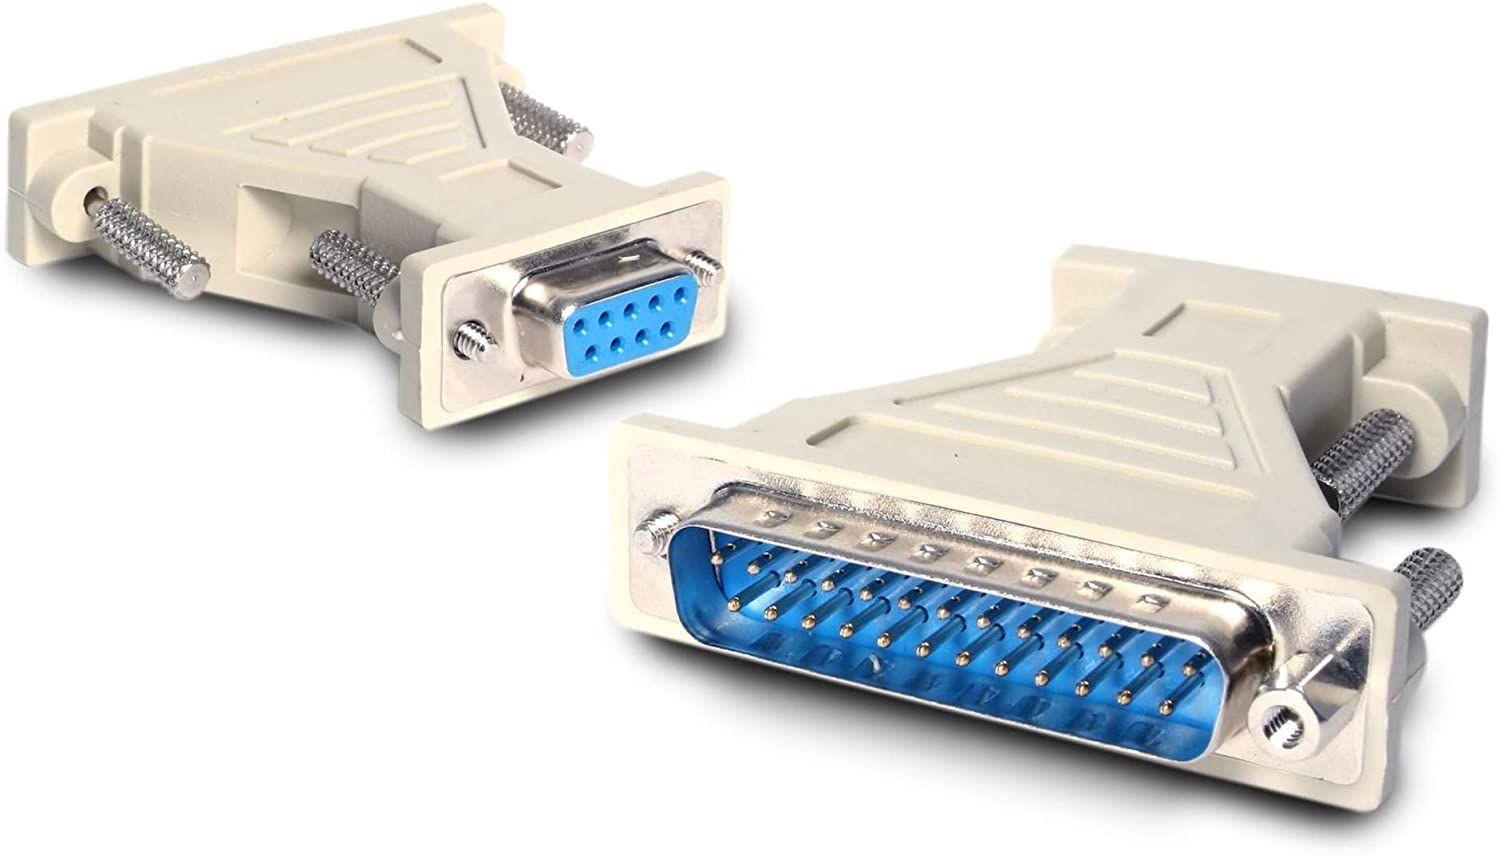 StarTech.com DB9 to DB25 Serial Cable Adapter - F/M - Serial adapter - DB-9 (F) to DB-25 (M) - AT925FM,Beige